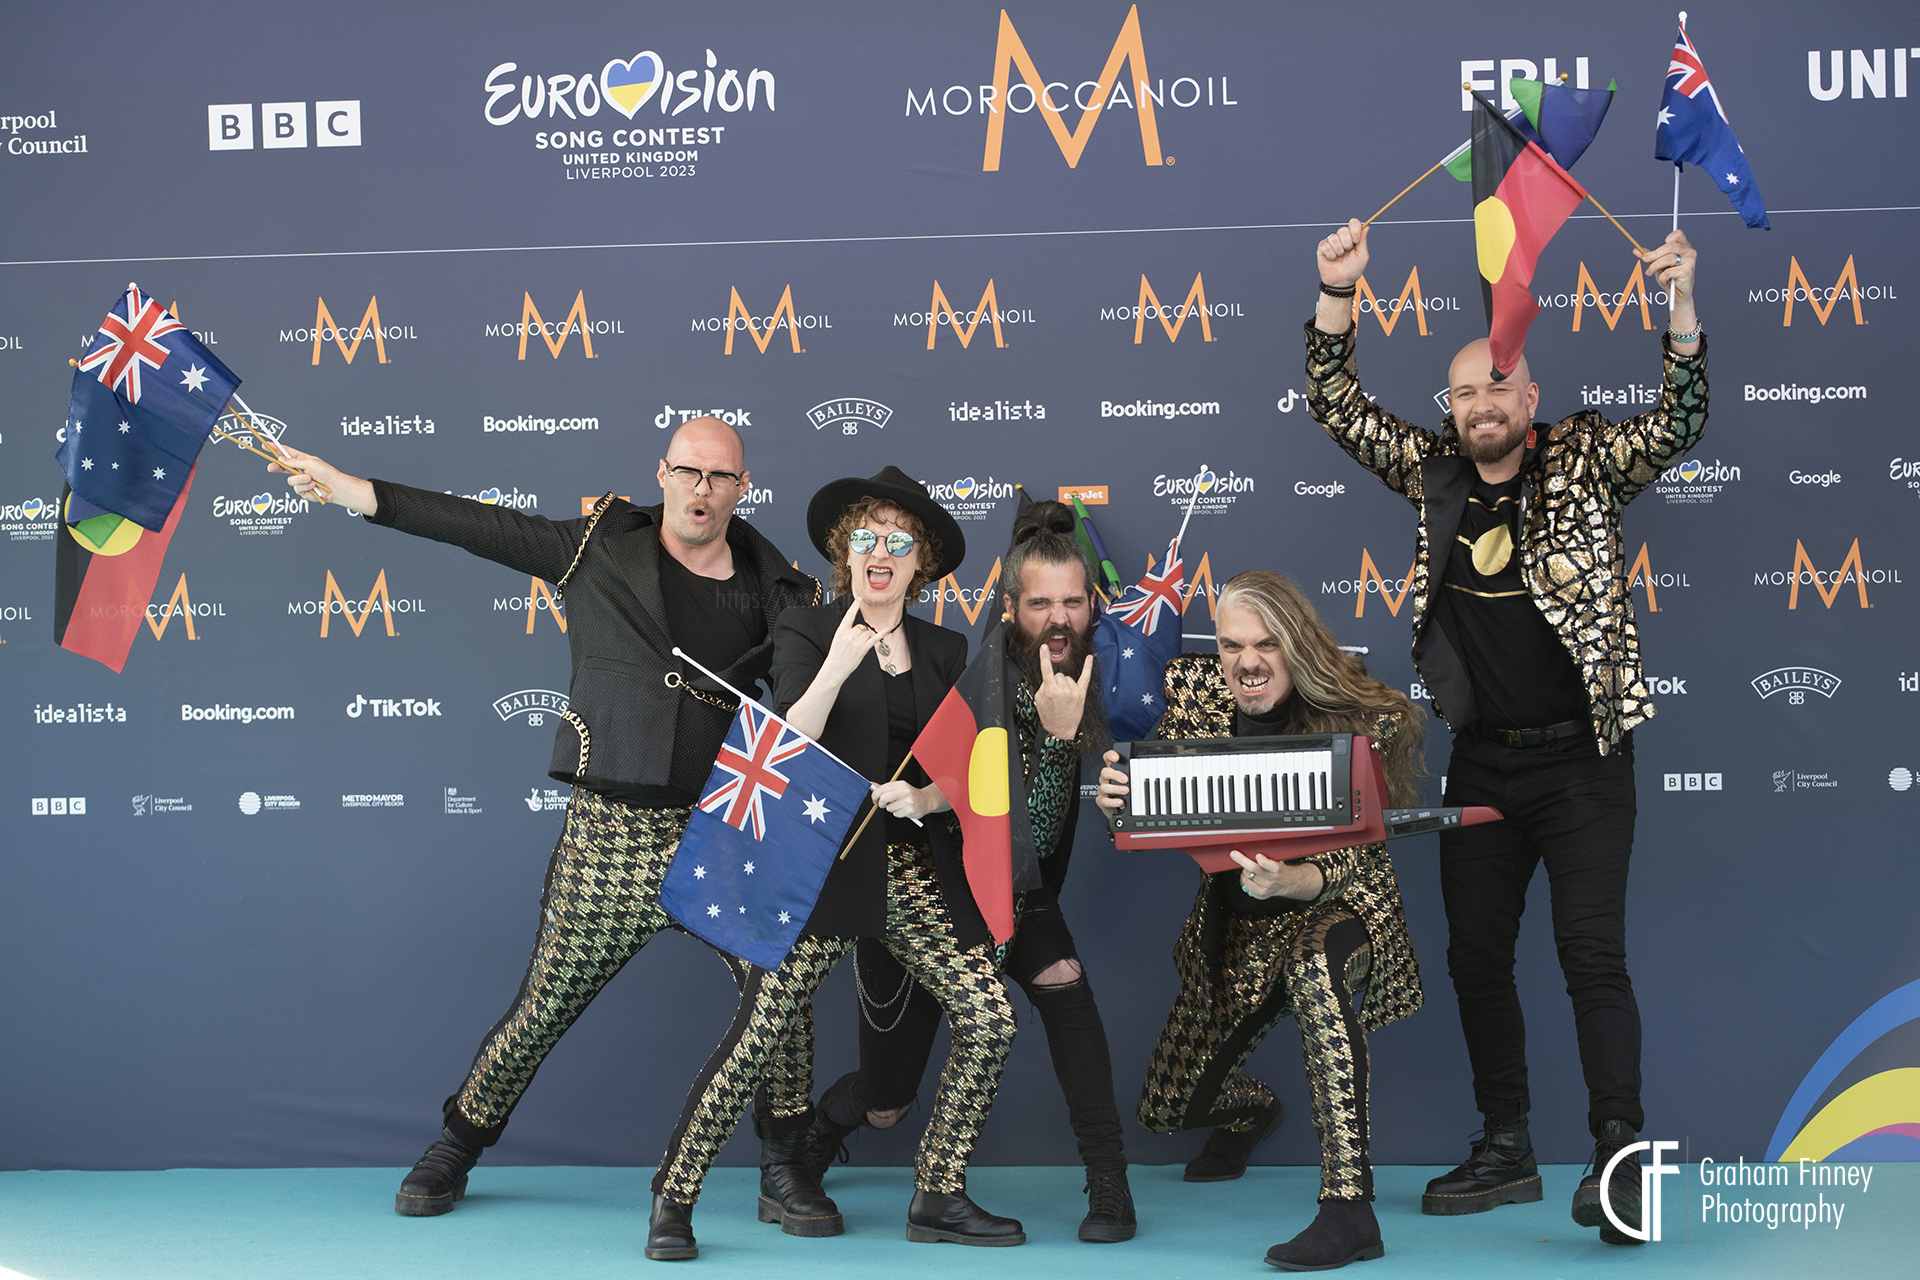 Voyager @ Eurovision 2023 by Graham Finney Photography